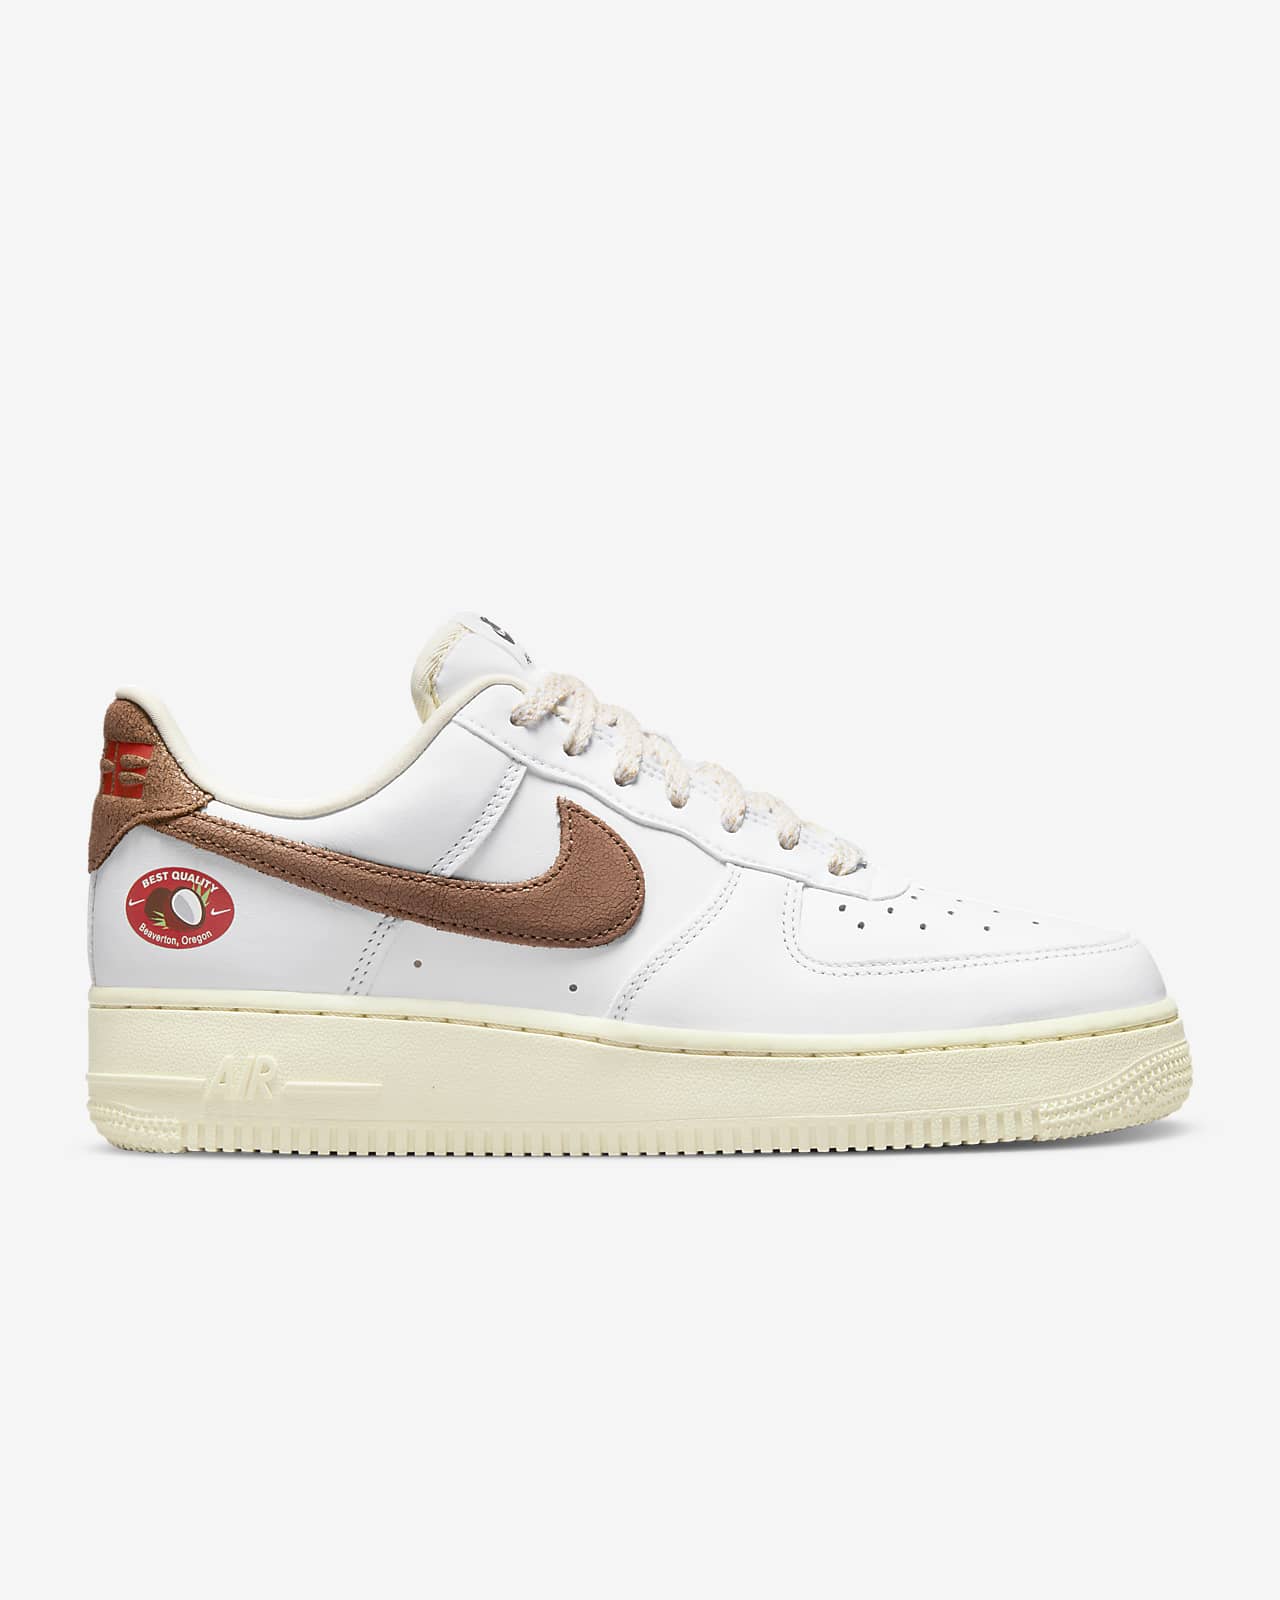 Nike Women's Air Force 1 LX Shoes in Brown, Size: 9.5 | DZ2789-200